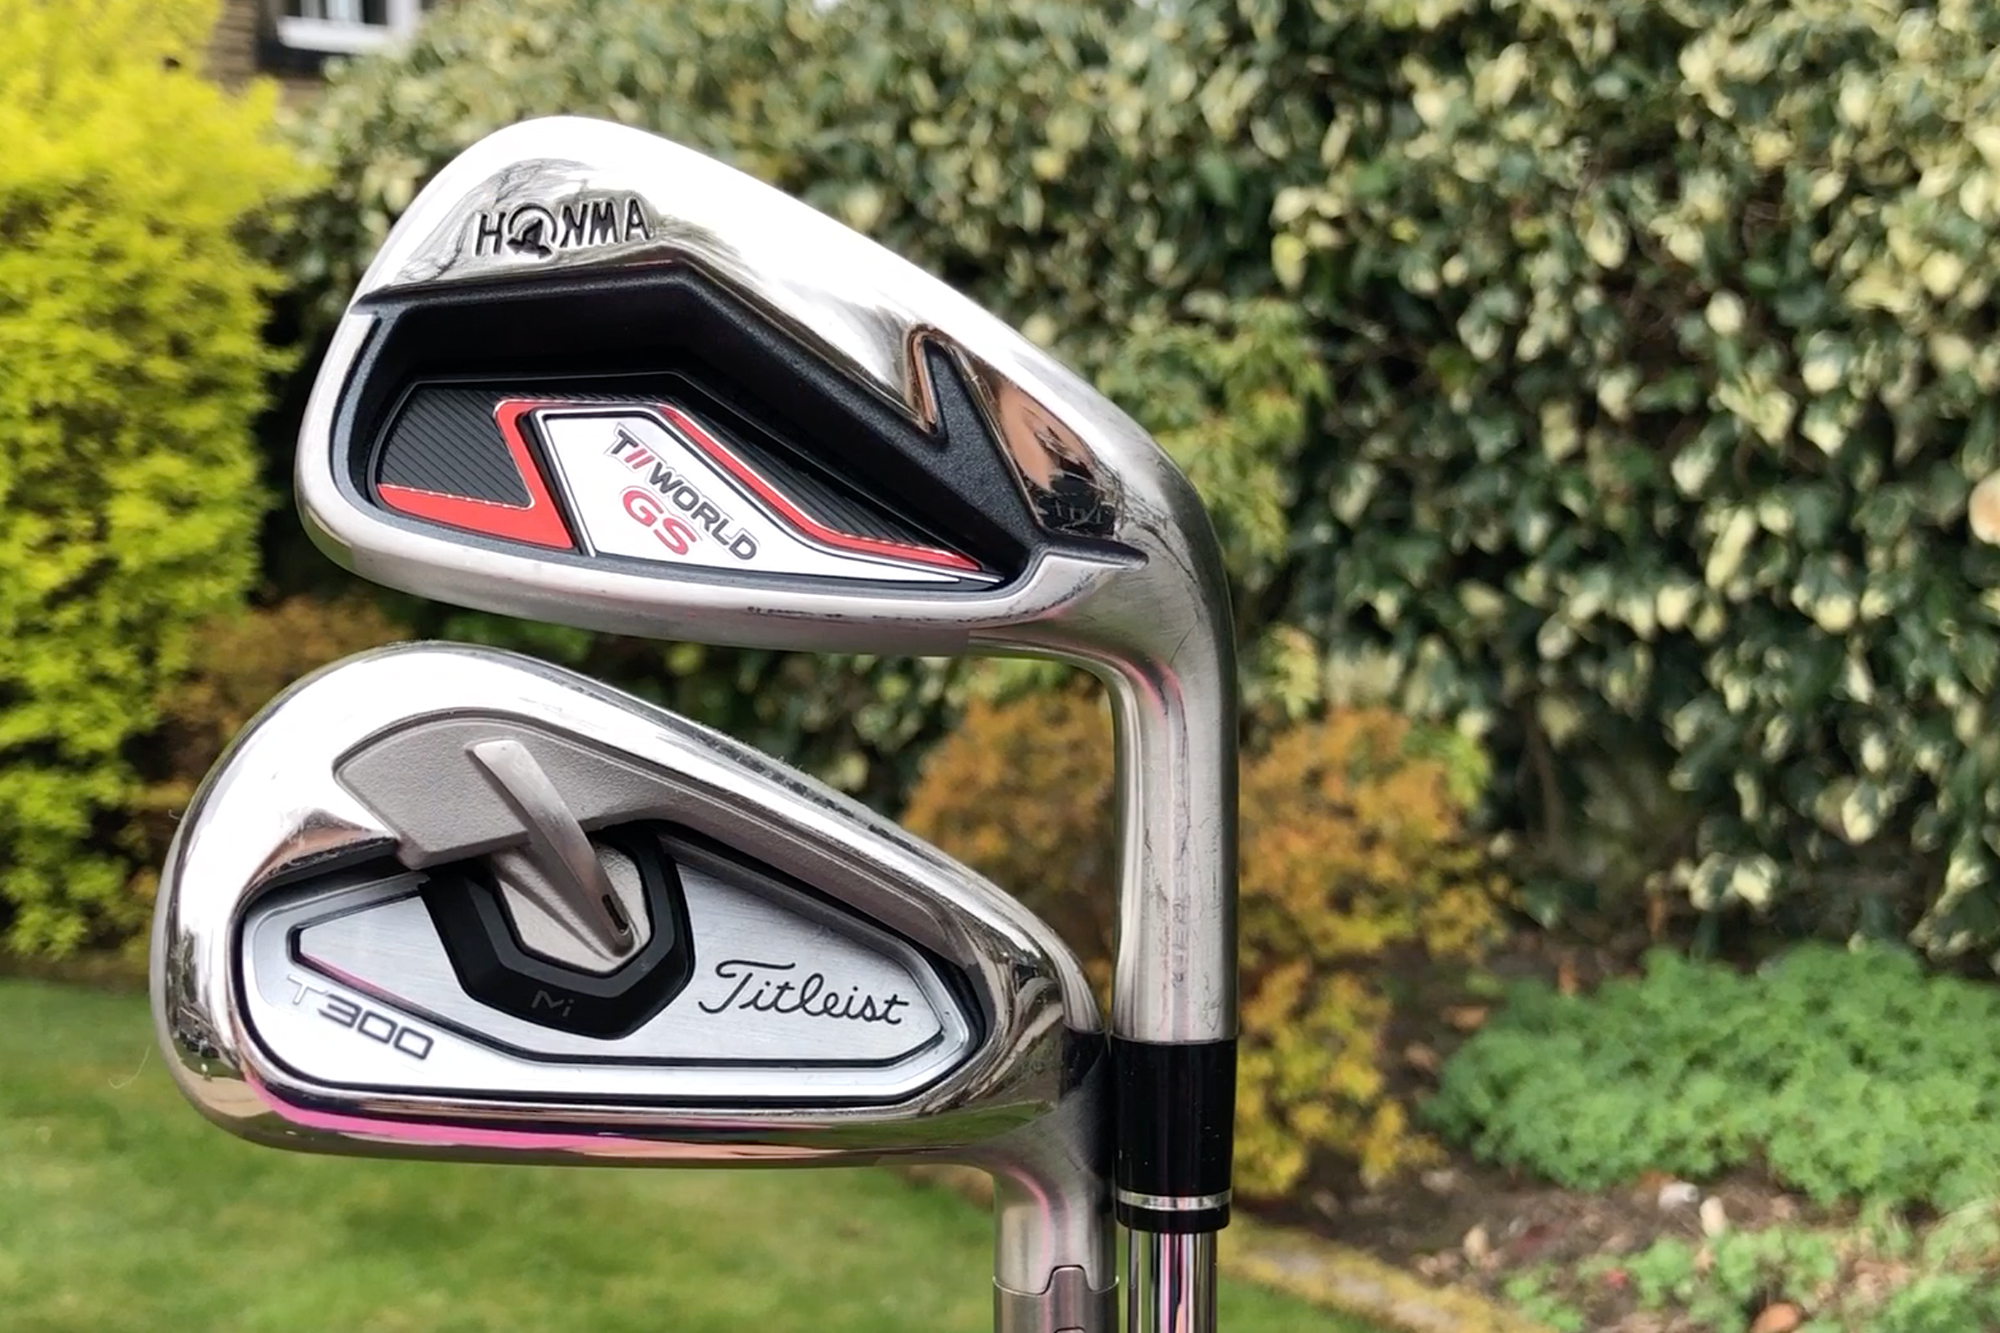 Irons World Cup 2021: Titleist T300 vs Honma GS